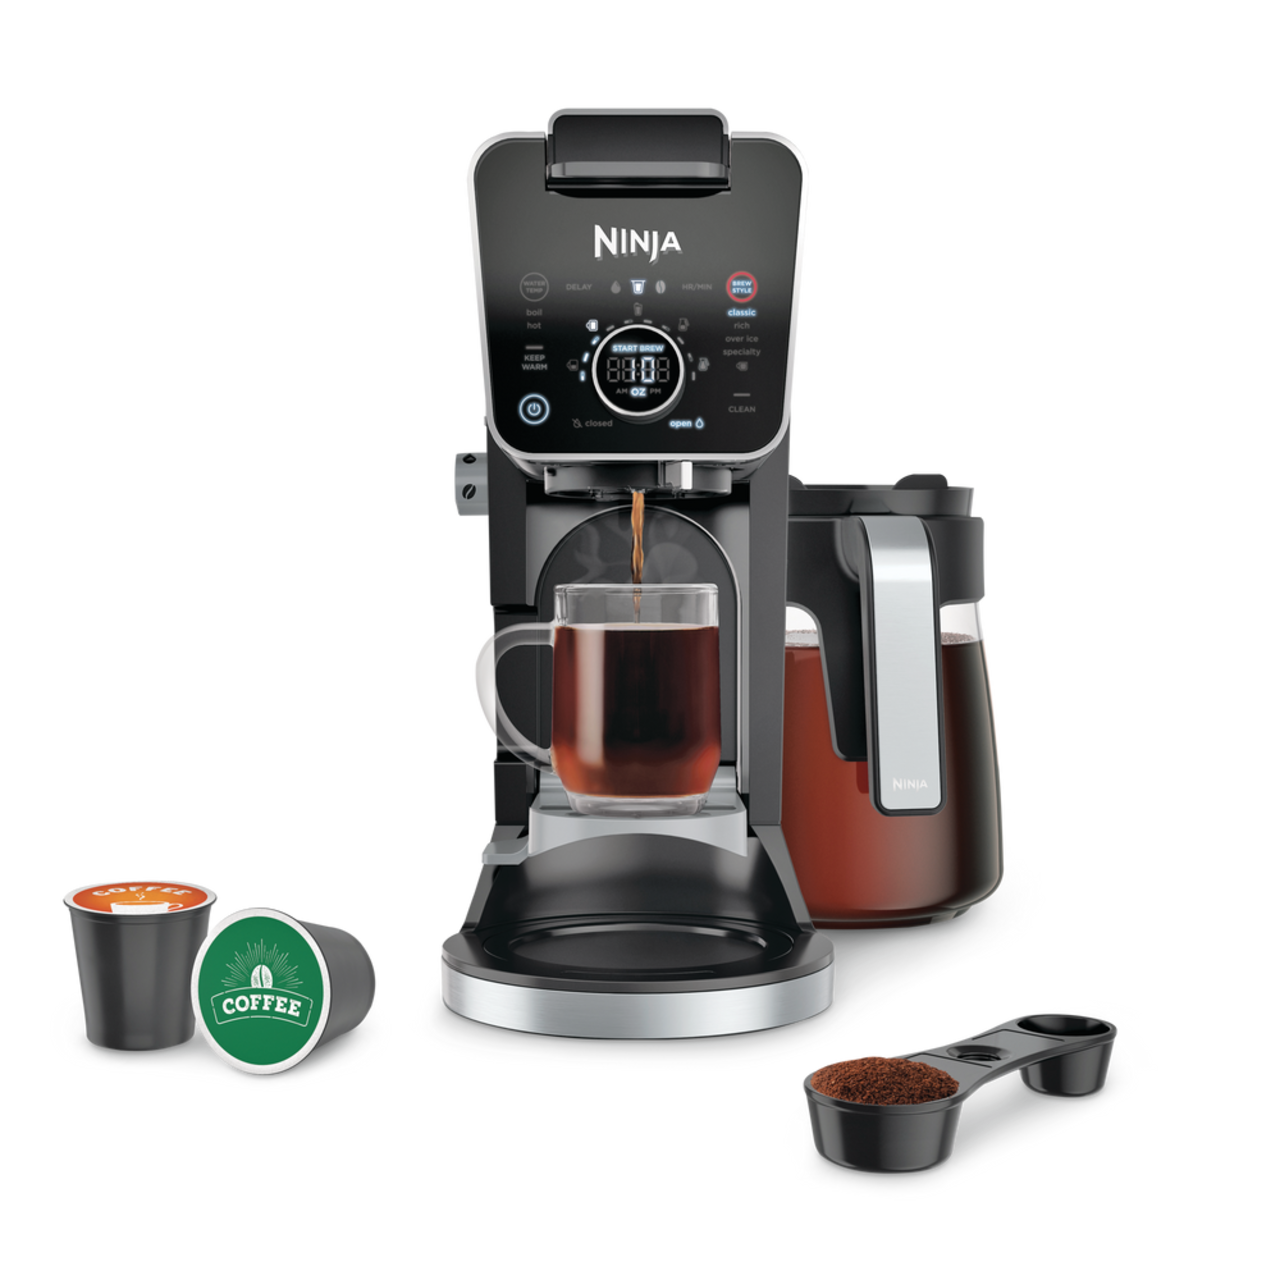 https://media-www.canadiantire.ca/product/living/kitchen/kitchen-appliances/0430960/ninja-dualbrew-pro-grounds-pods-specialty-coffee-system-428d76dc-ffb0-4186-9b4d-c6638f9a3090.png?imdensity=1&imwidth=640&impolicy=mZoom